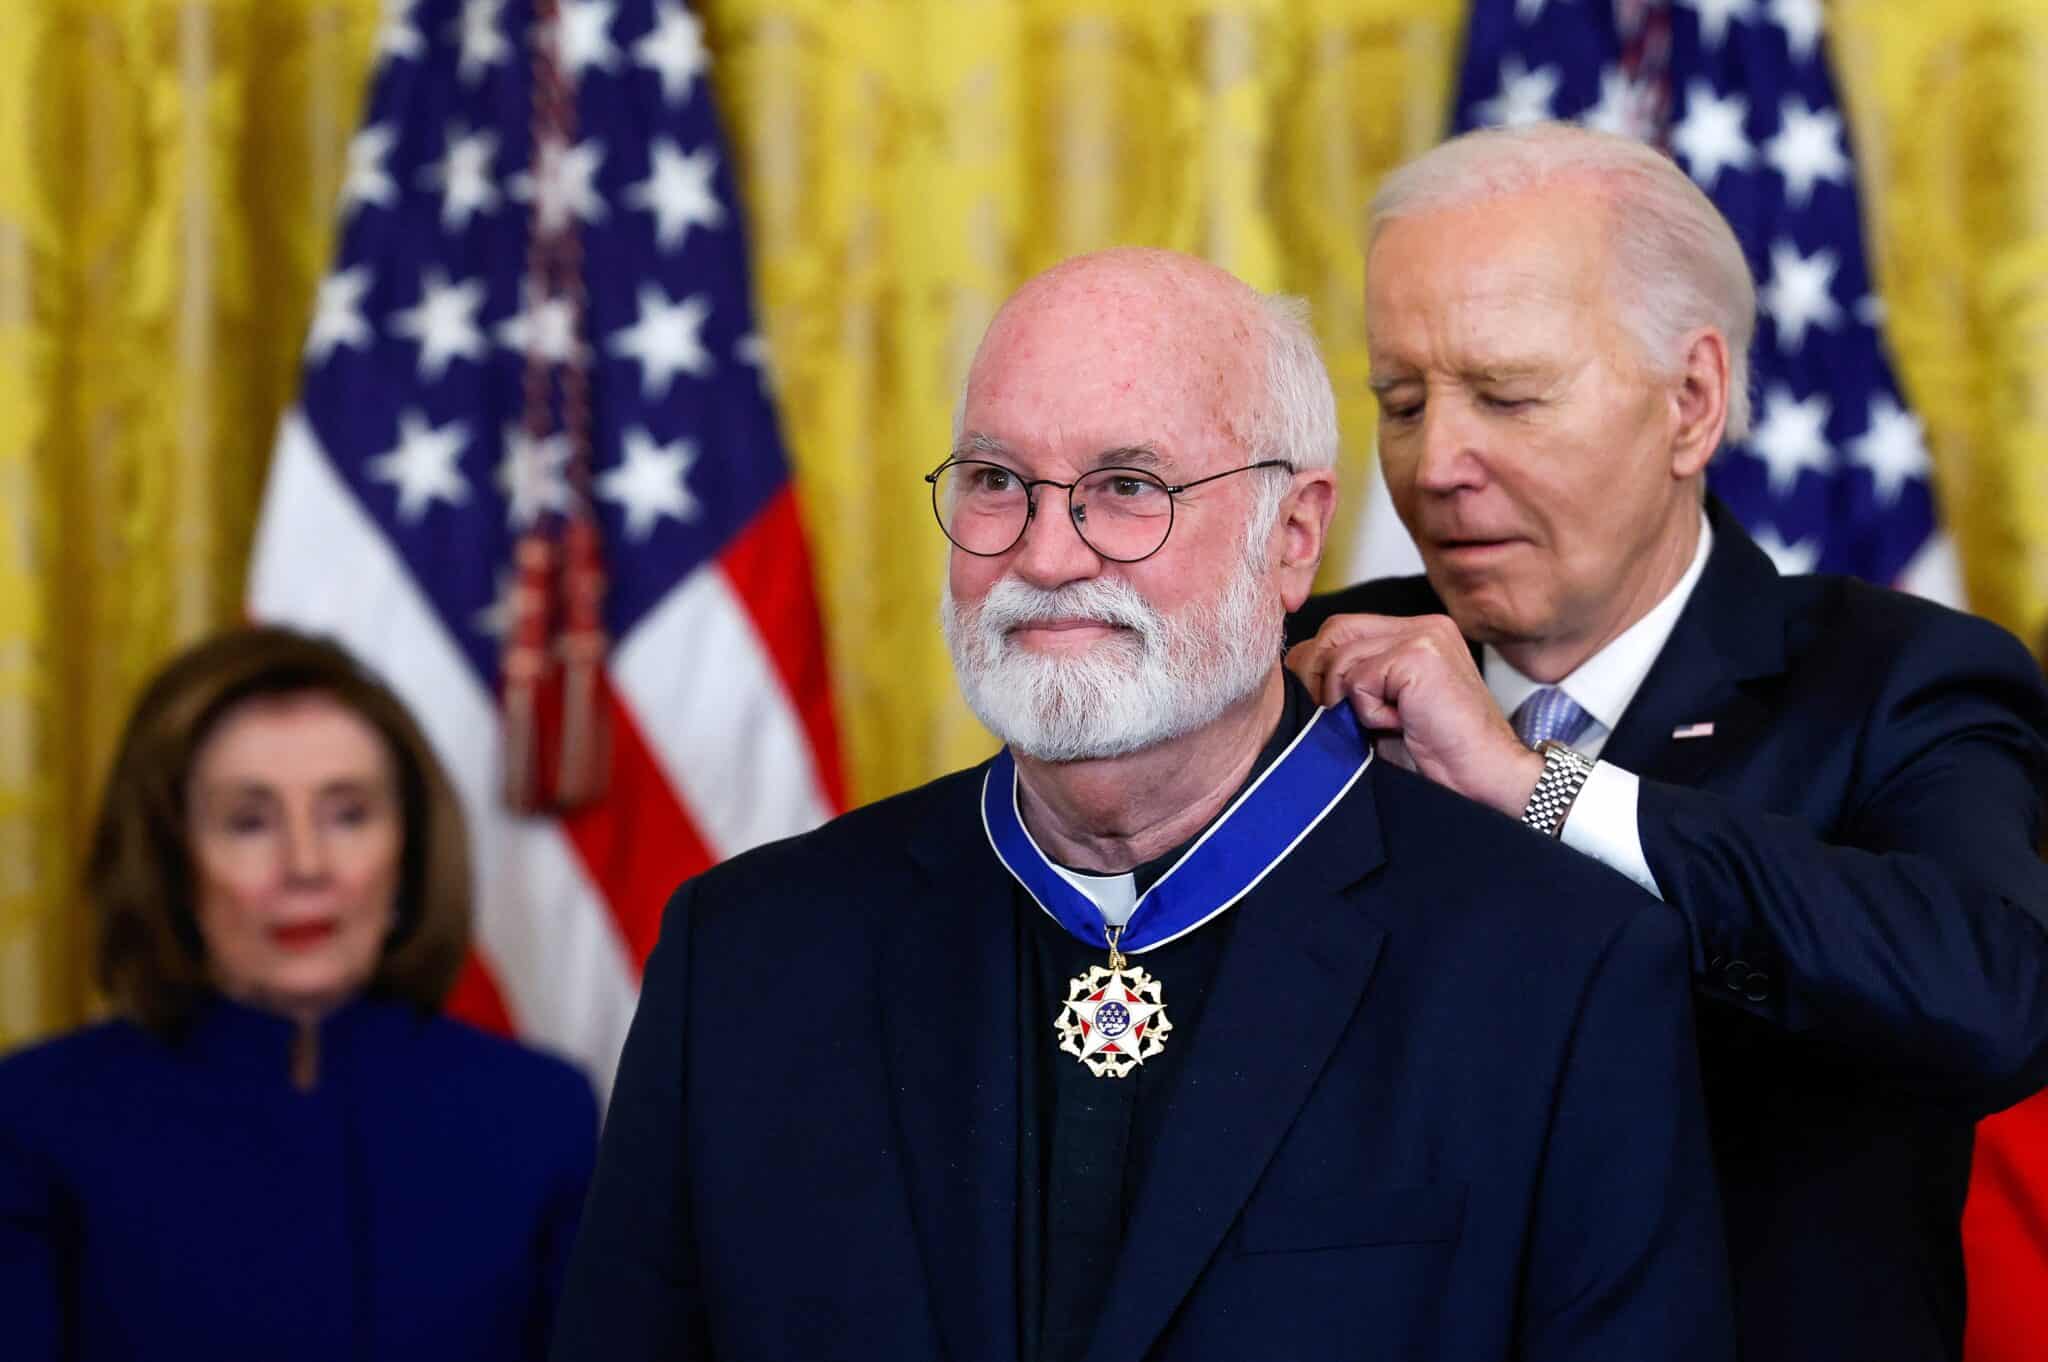 U.S. President Joe Biden presents the Presidential Medal of Freedom to Jesuit Father Greg Boyle during a ceremony at the White House in Washington May 3, 2024. Father Boyle established Homeboy Industries in Los Angeles in 1992 to improve the lives of former gang members. (OSV News photo/Evelyn Hockstein, Reuters)